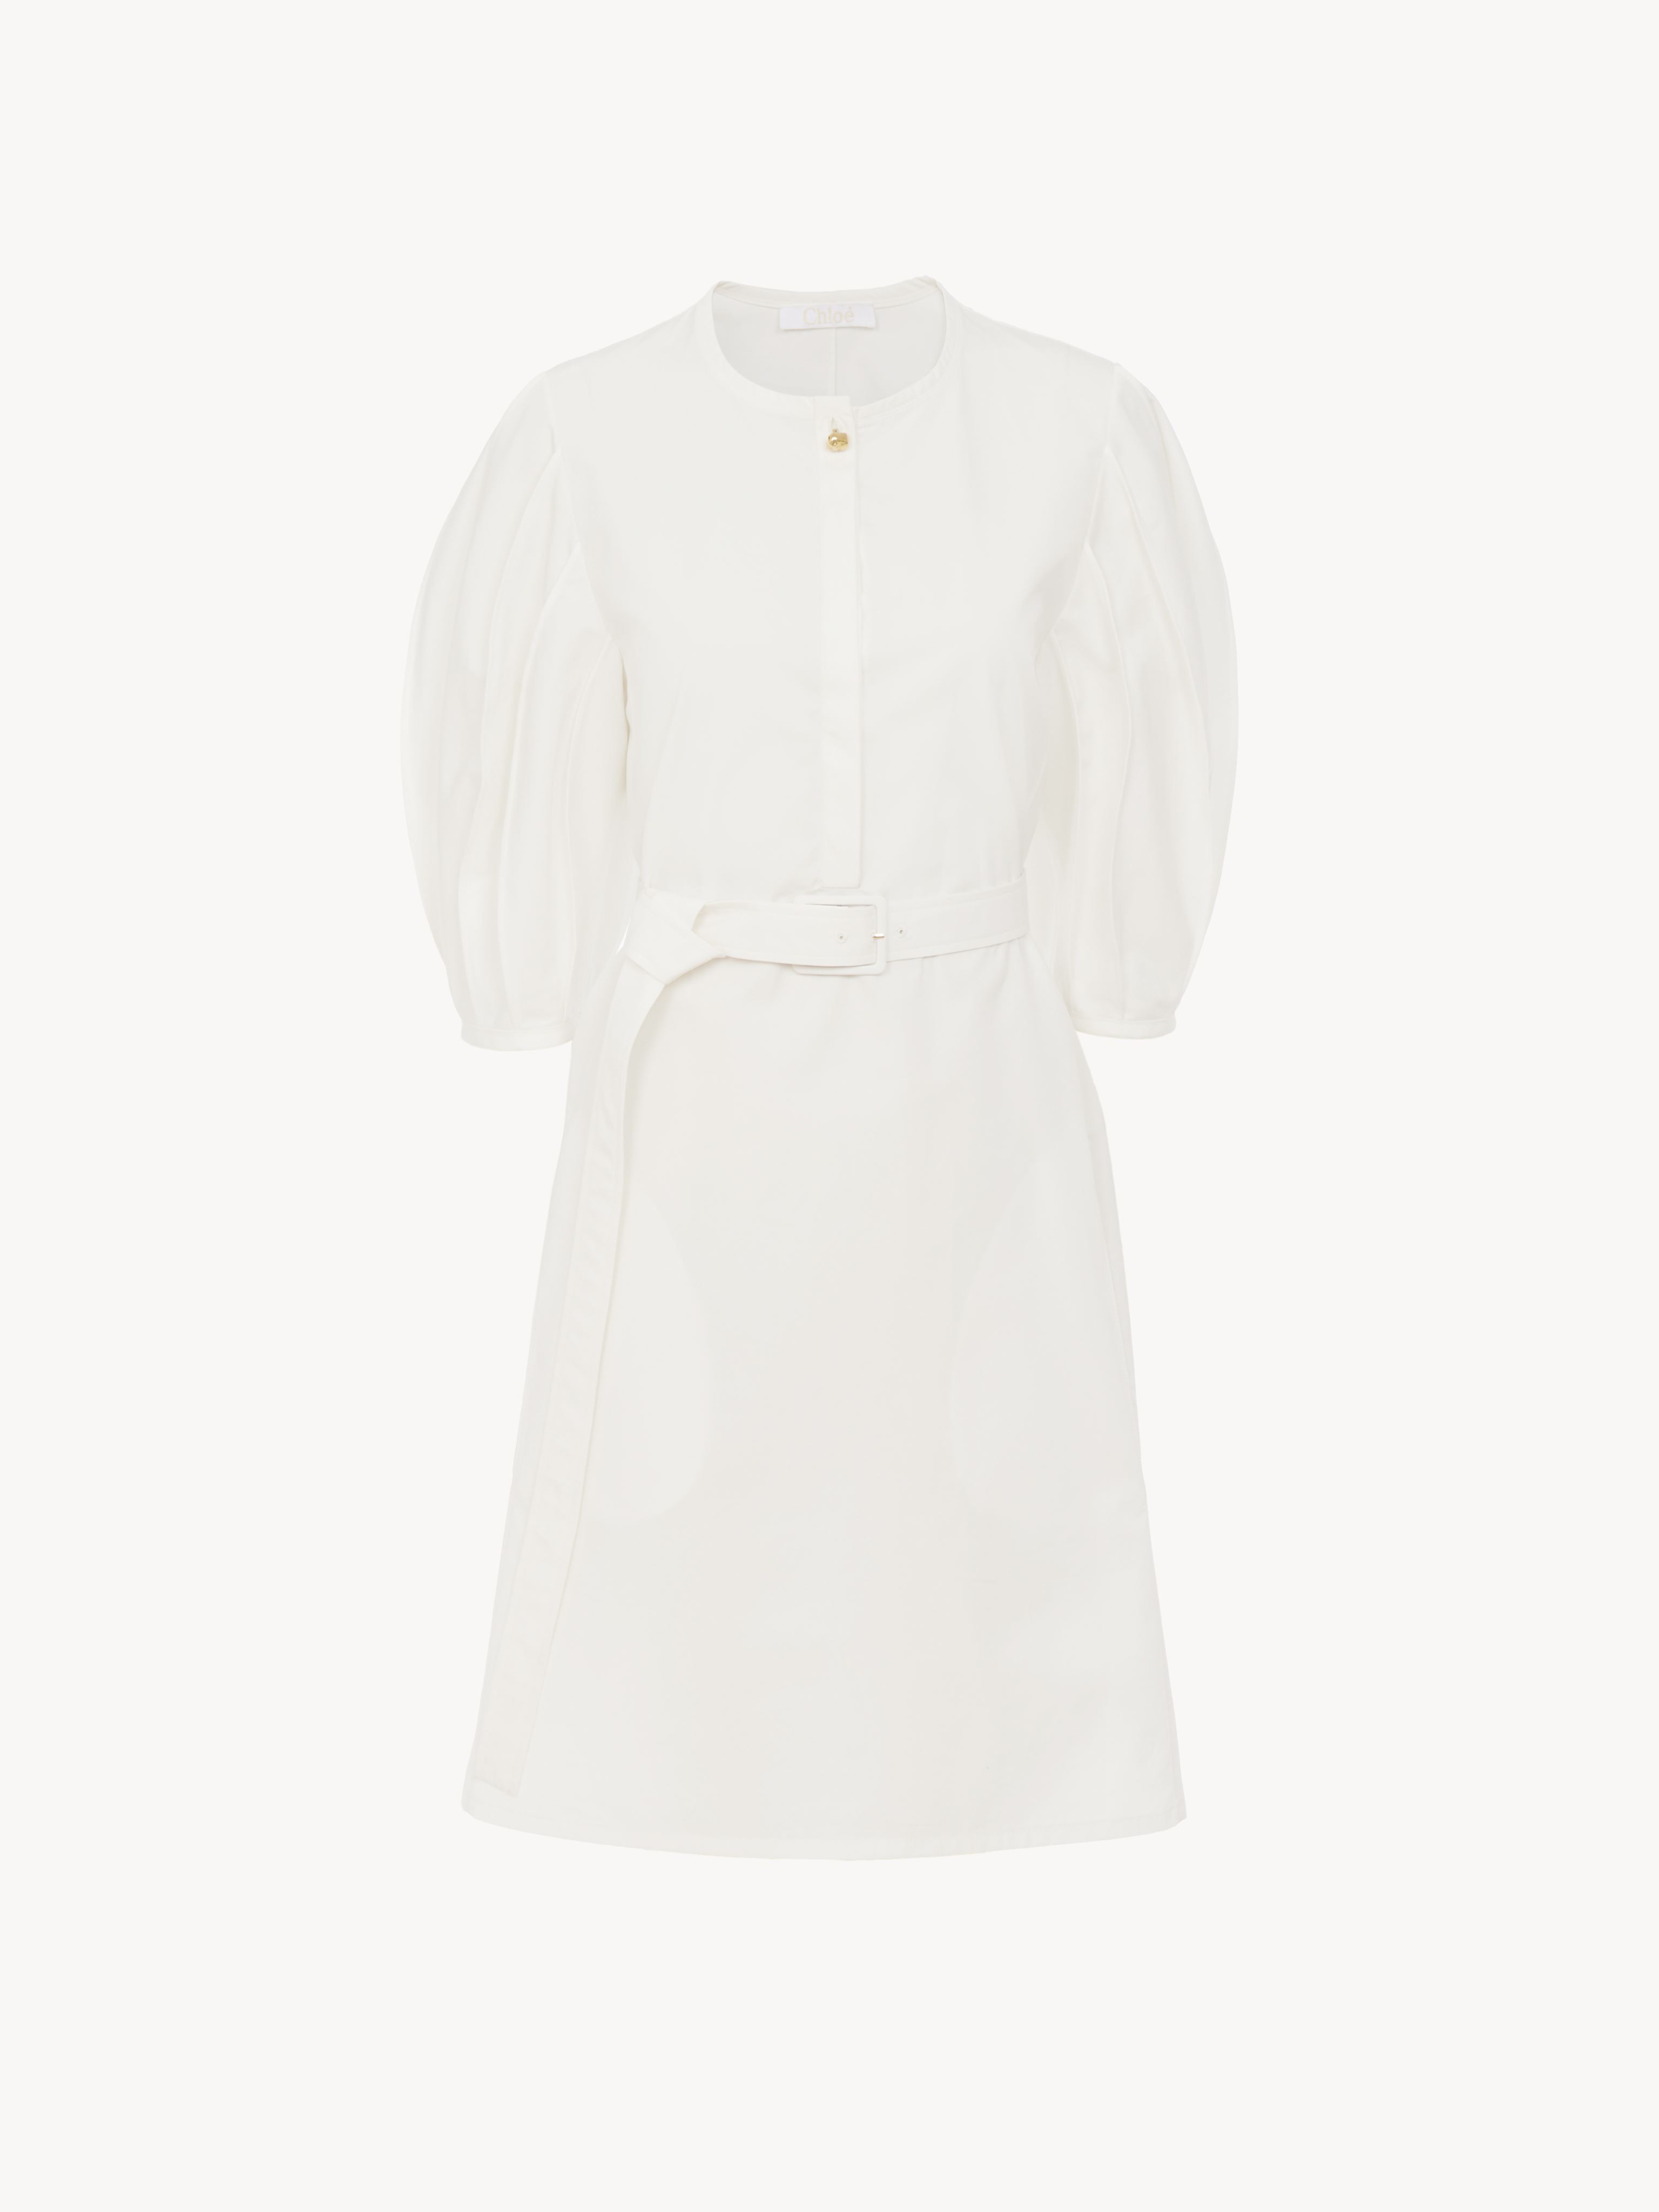 Chloé Dressing Gown Chemise Courte Manches « Lanterne » Femme Brun Taille 42 100% Coton, Pinctada Maxima, Farmed, C In Brown